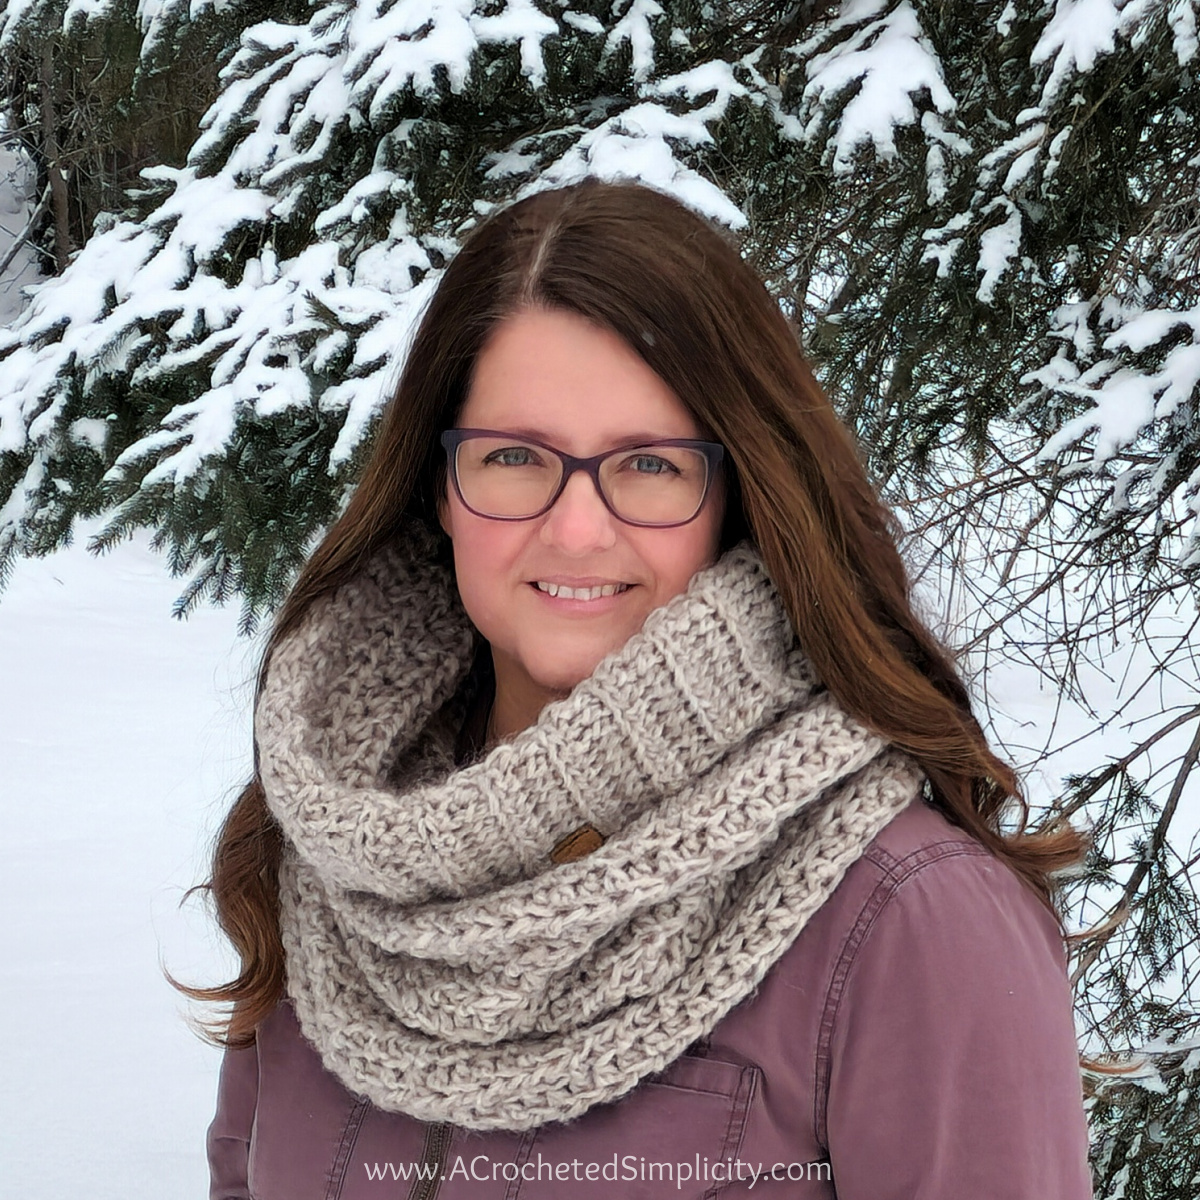 Crochet hooded cowl modeled by woman with long brown hair and glasses.